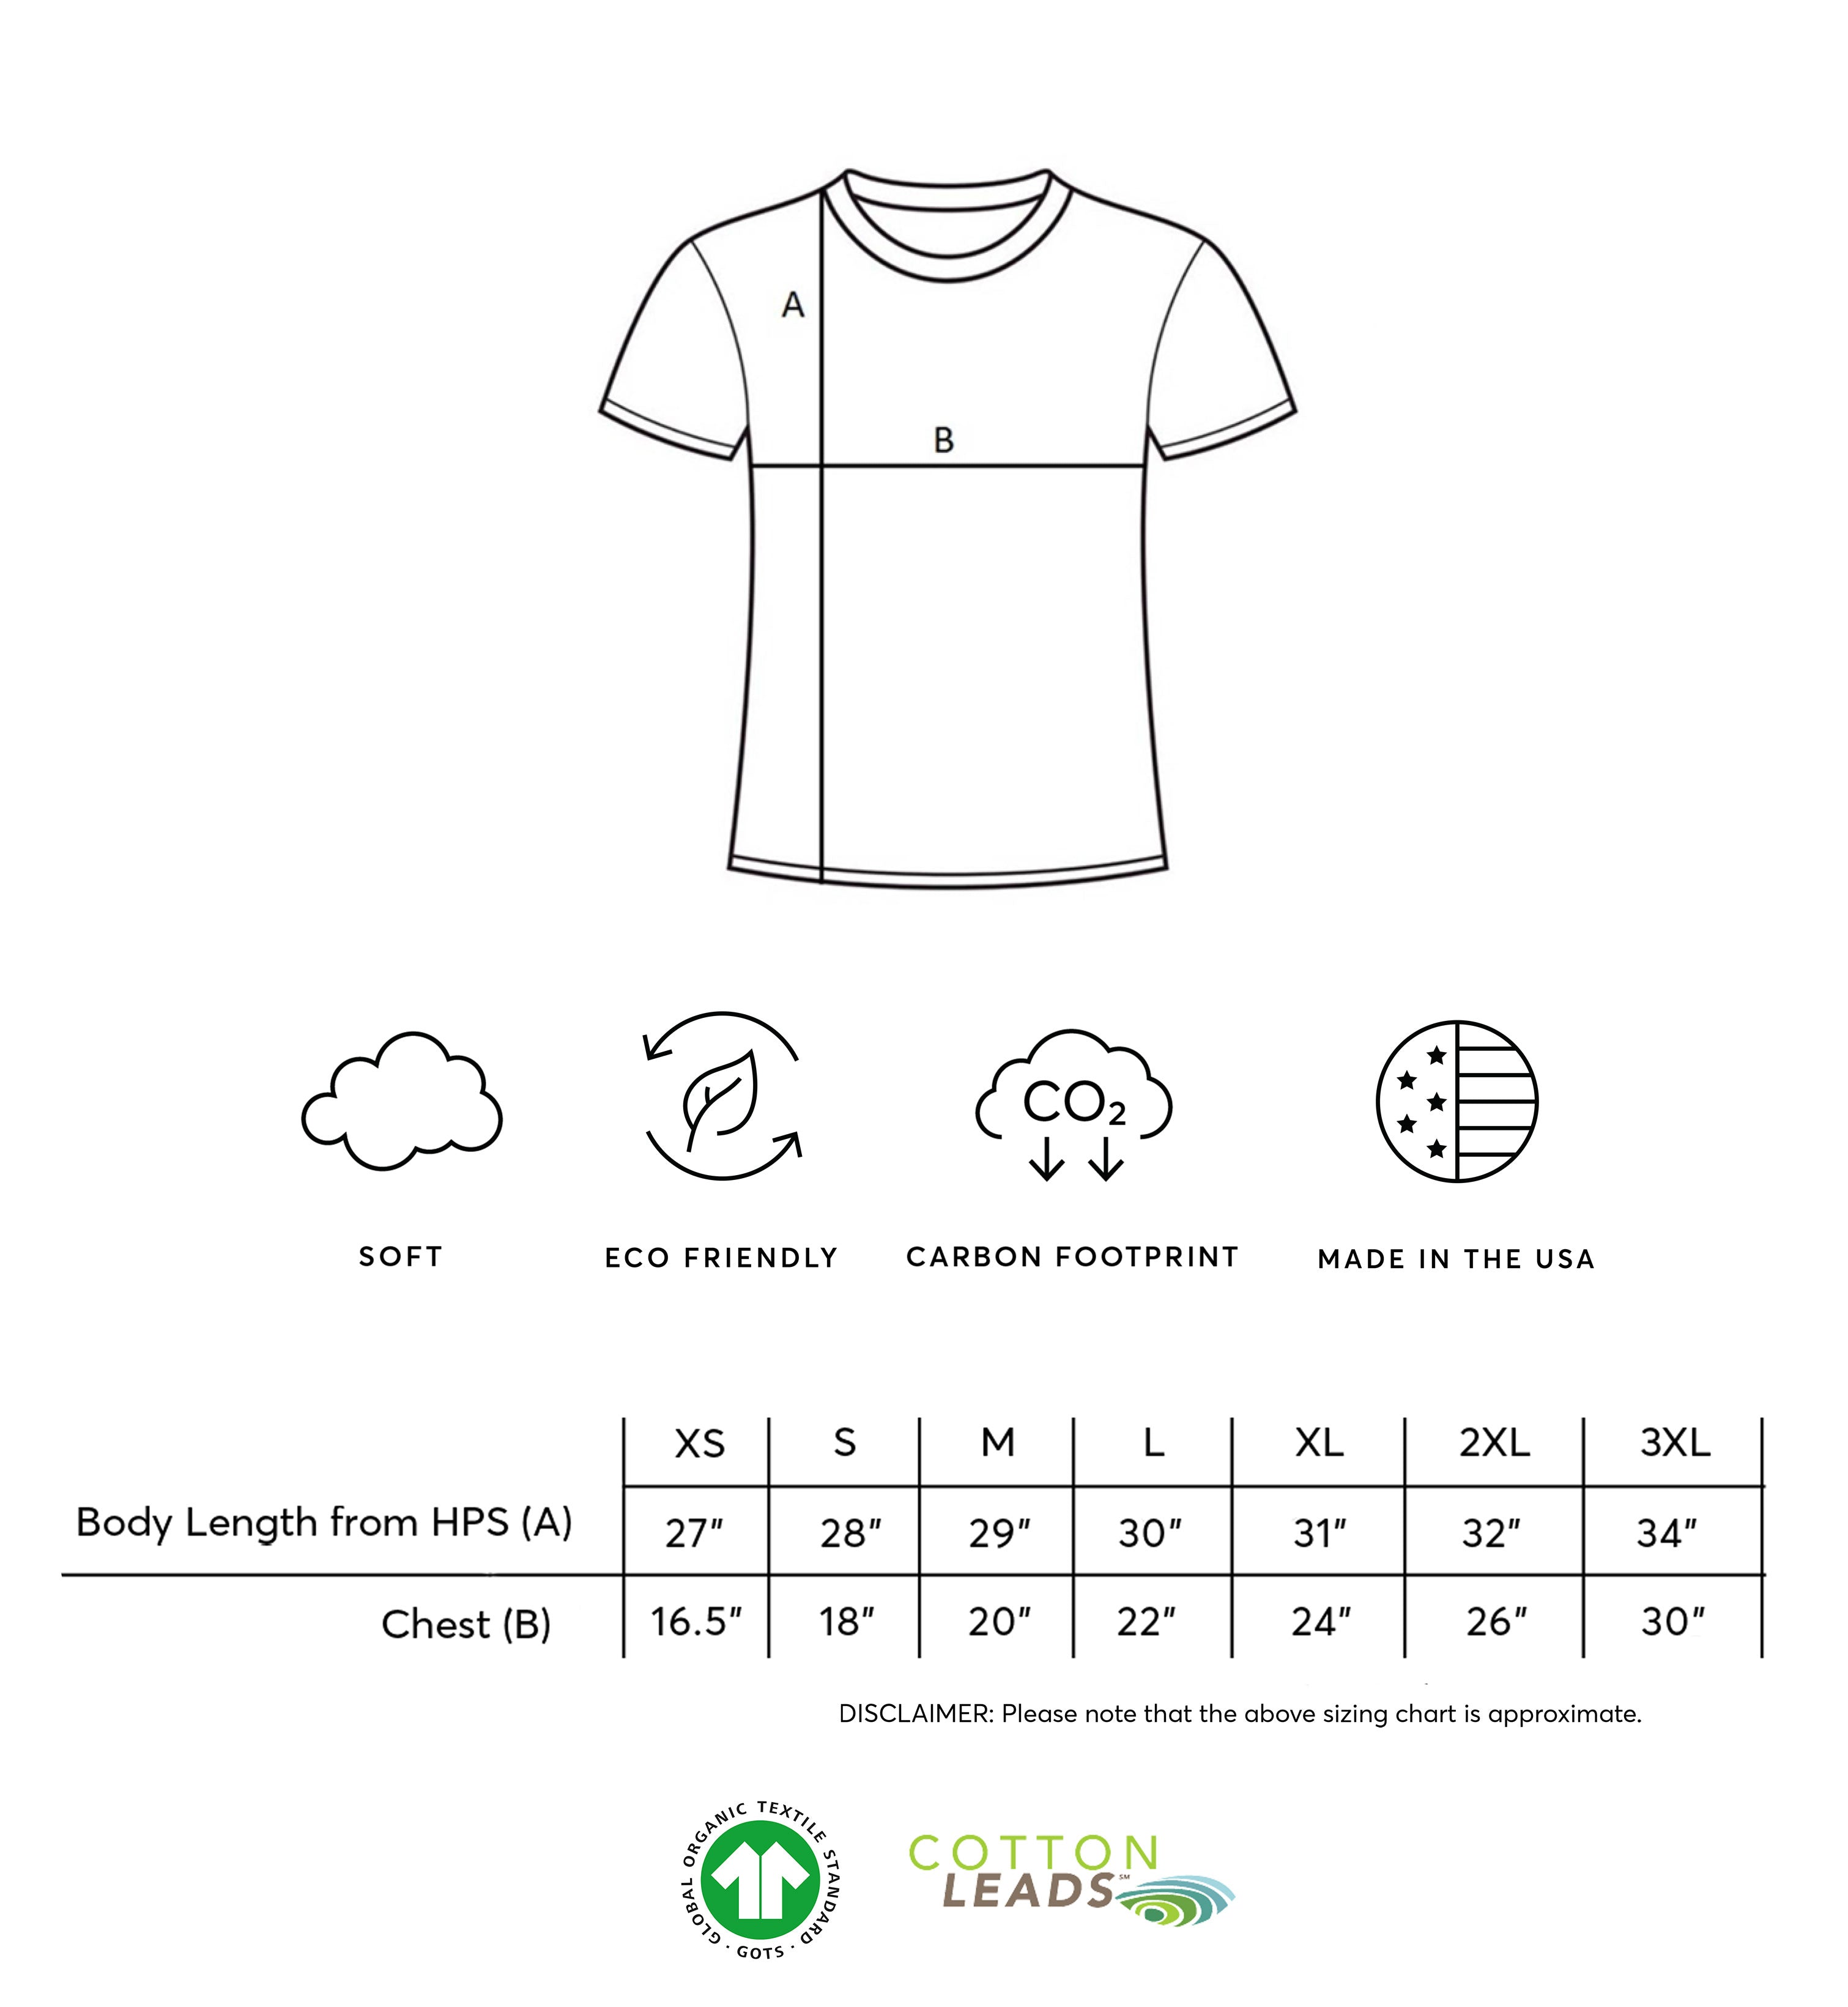 100% Certified Organic Cotton T-Shirt Made in the USA